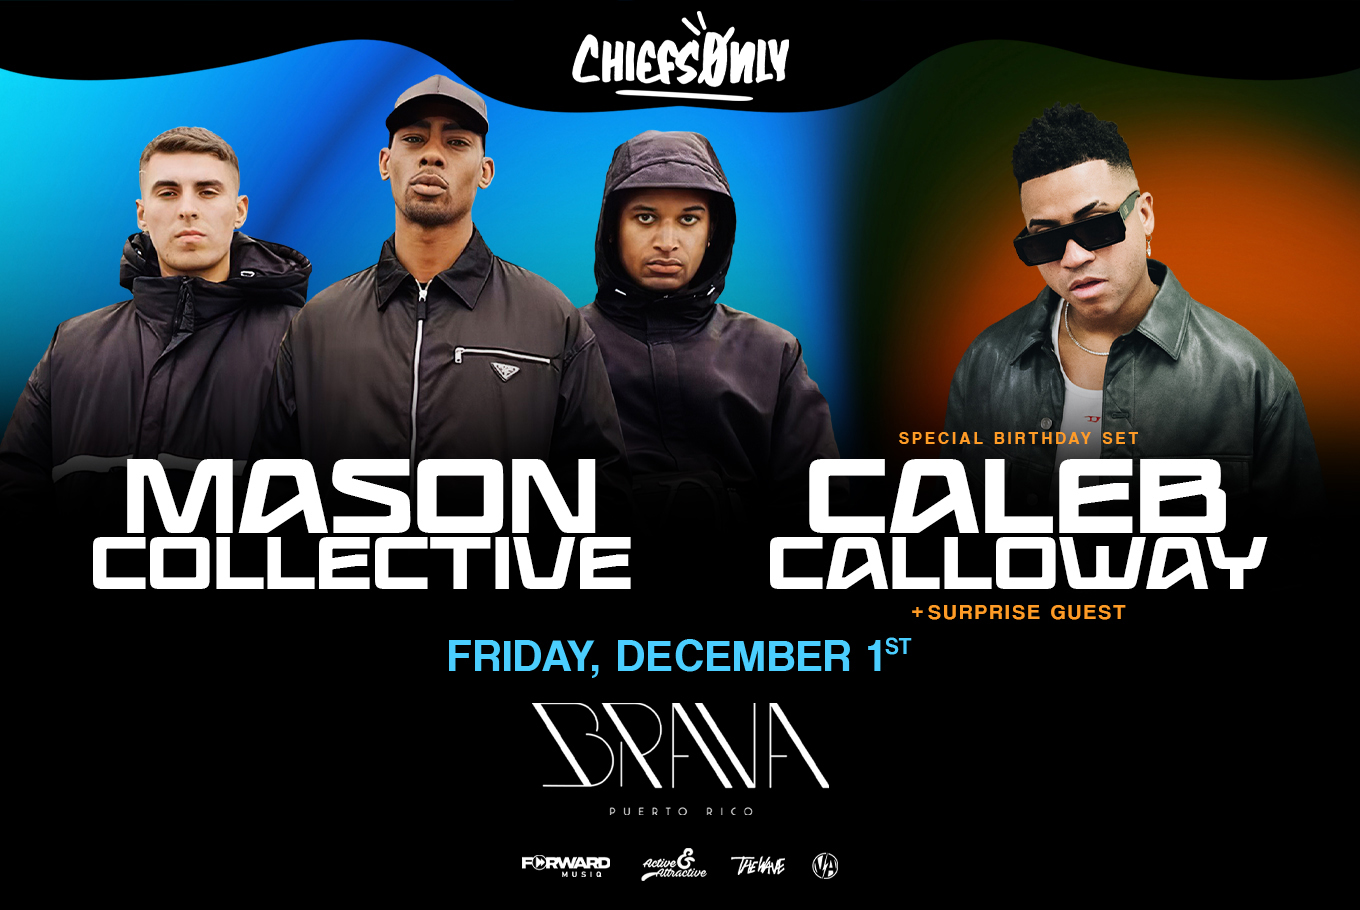 Chiefs Only ft. Mason Collective & Caleb Calloway